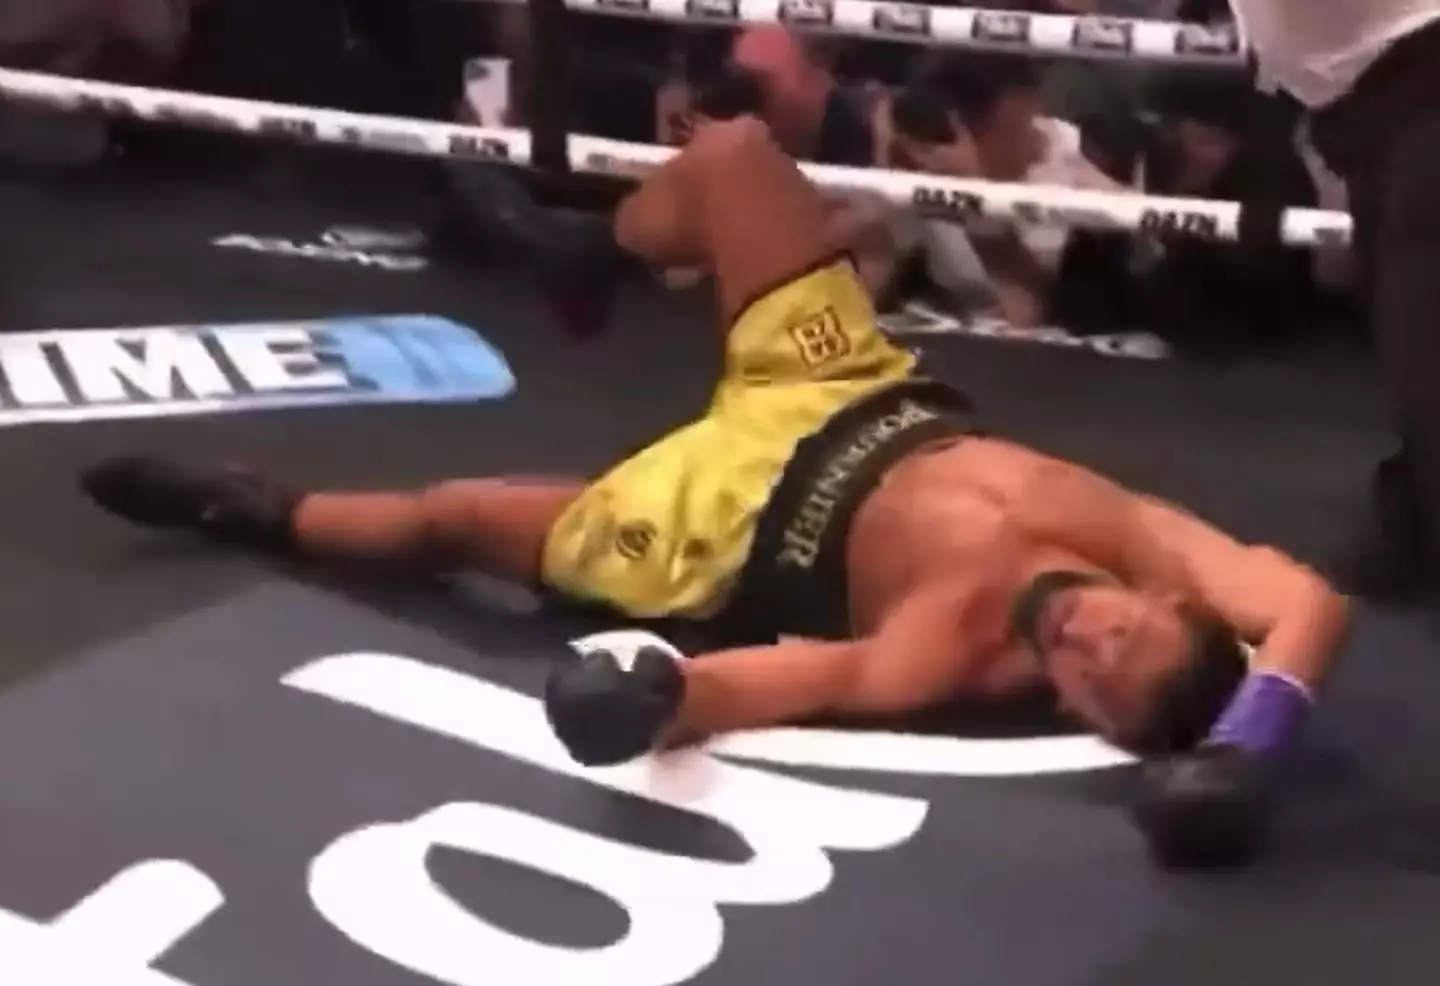 Fournier was KO'd by the blow but he thinks KSI should have been disqualified.